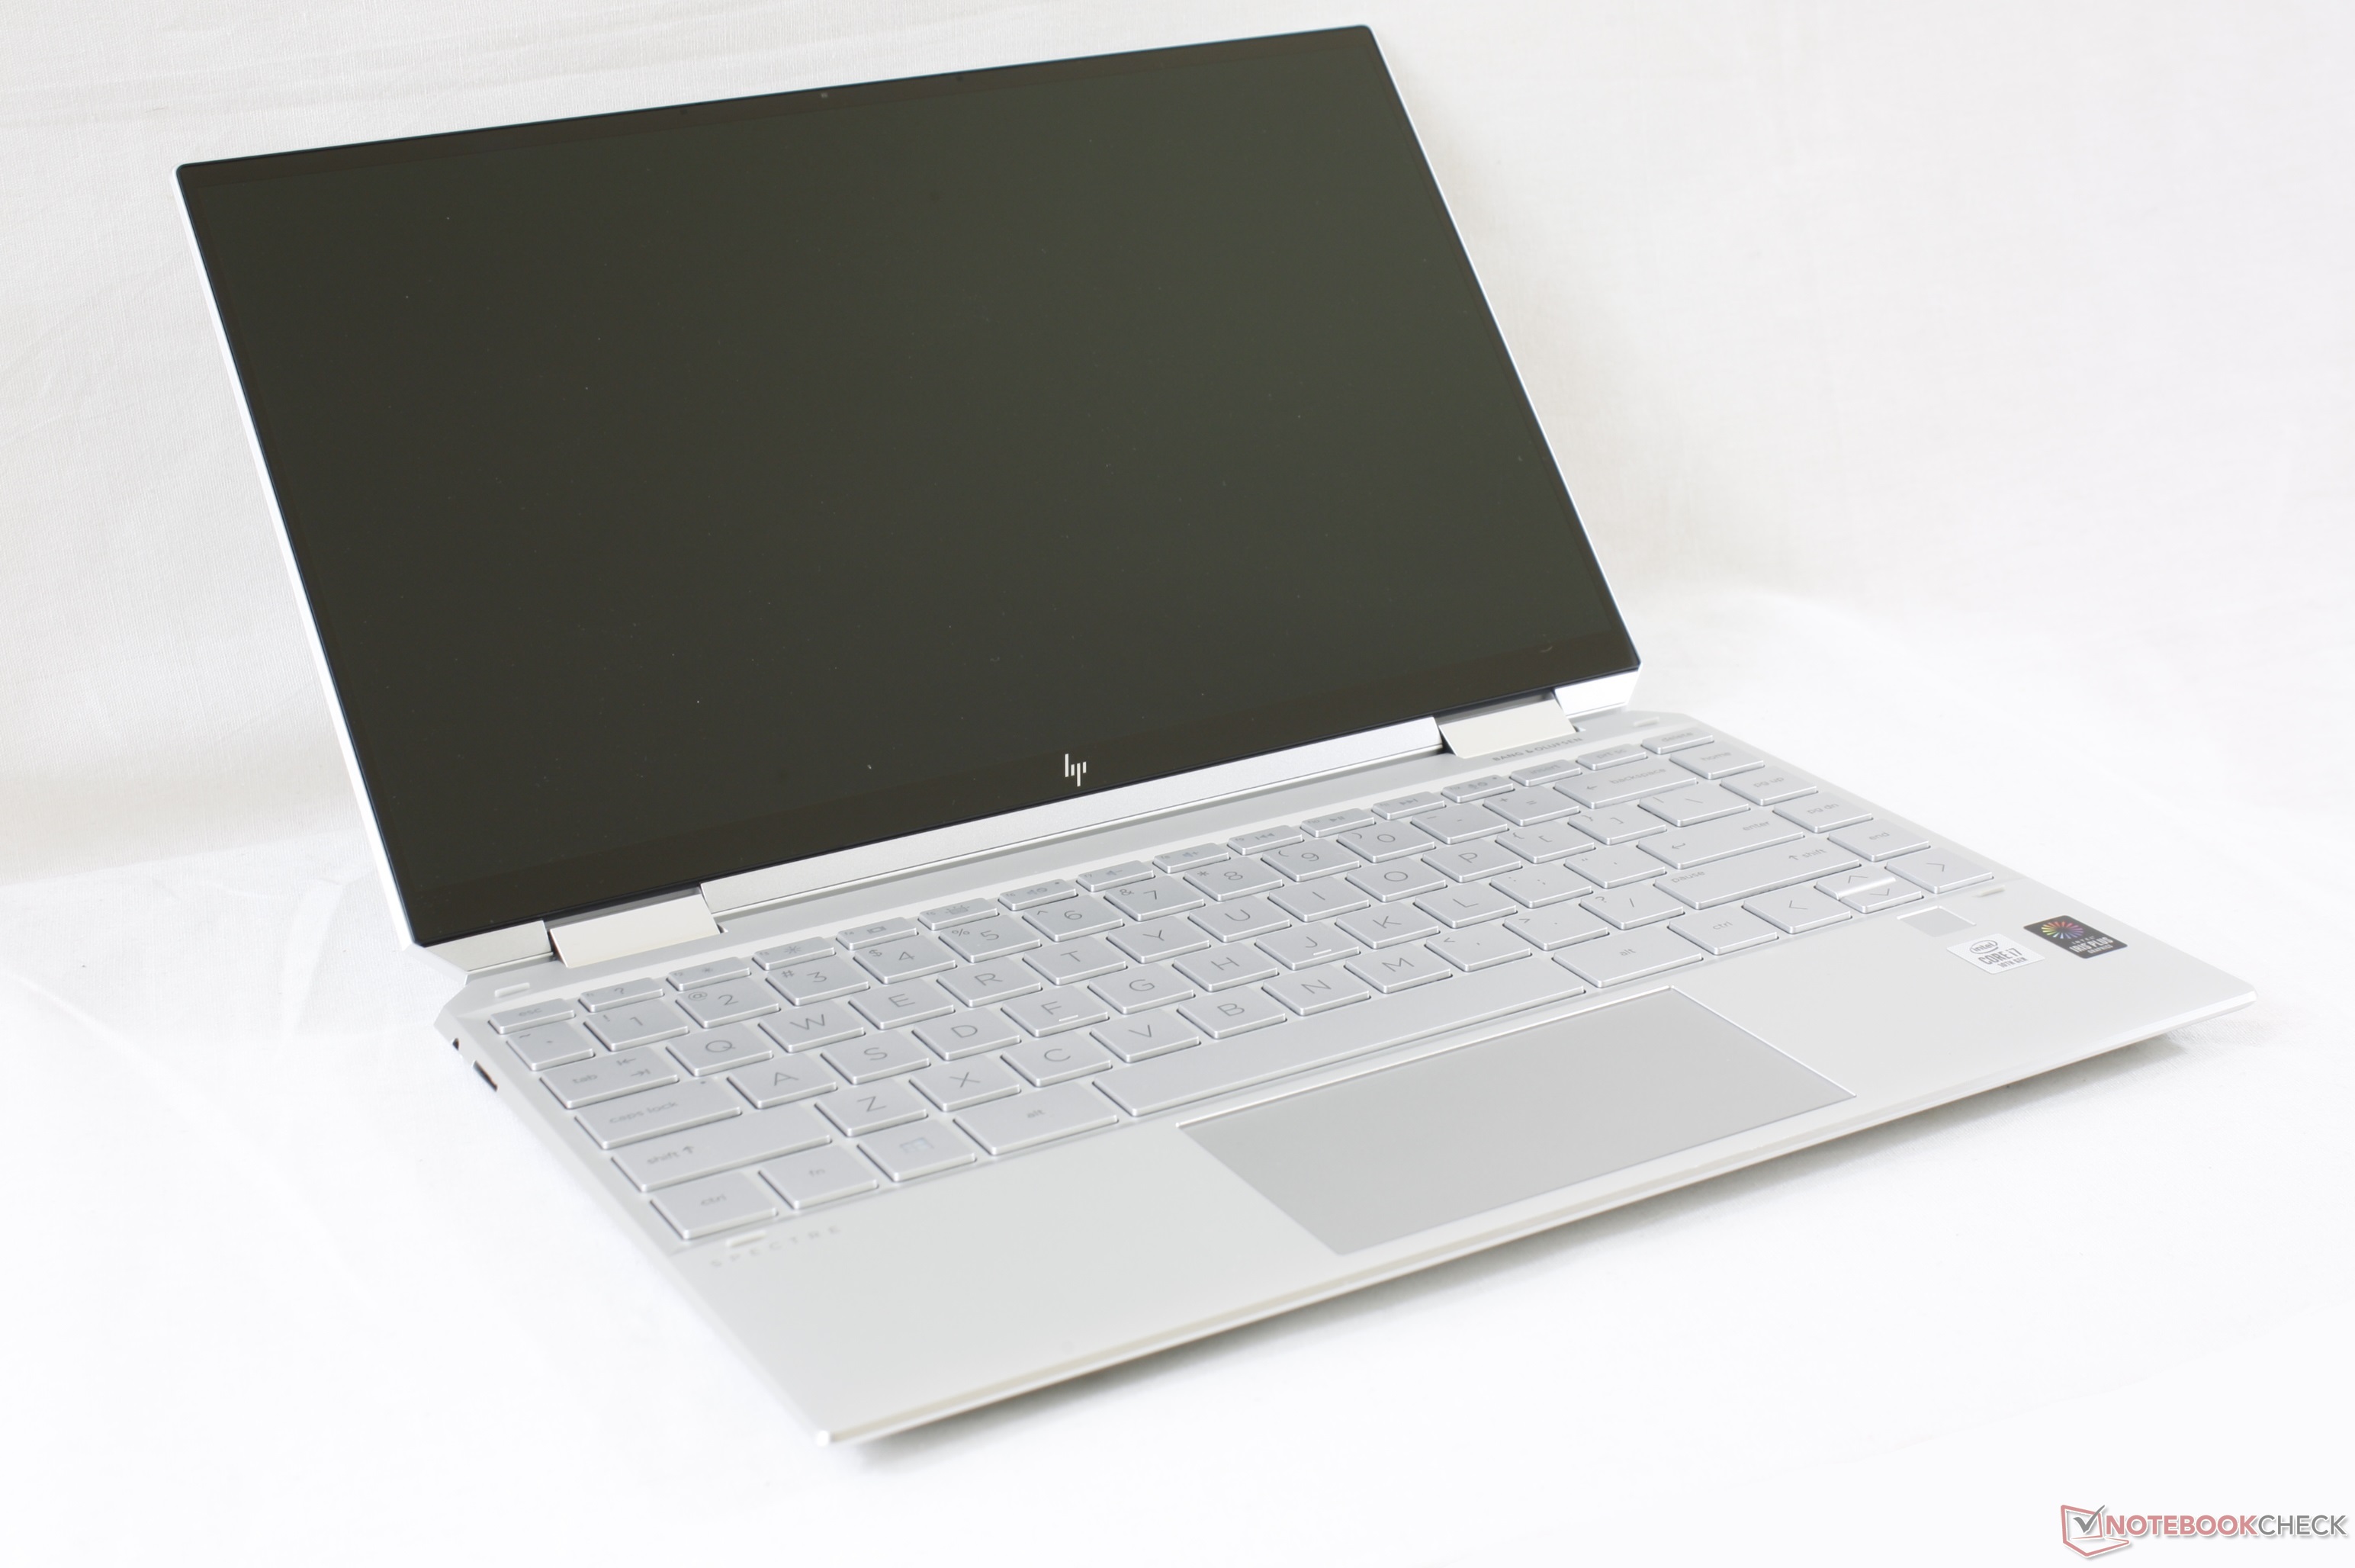 HP Spectre x360 13-aw0013dx Convertible Review: Powered by Intel Ice